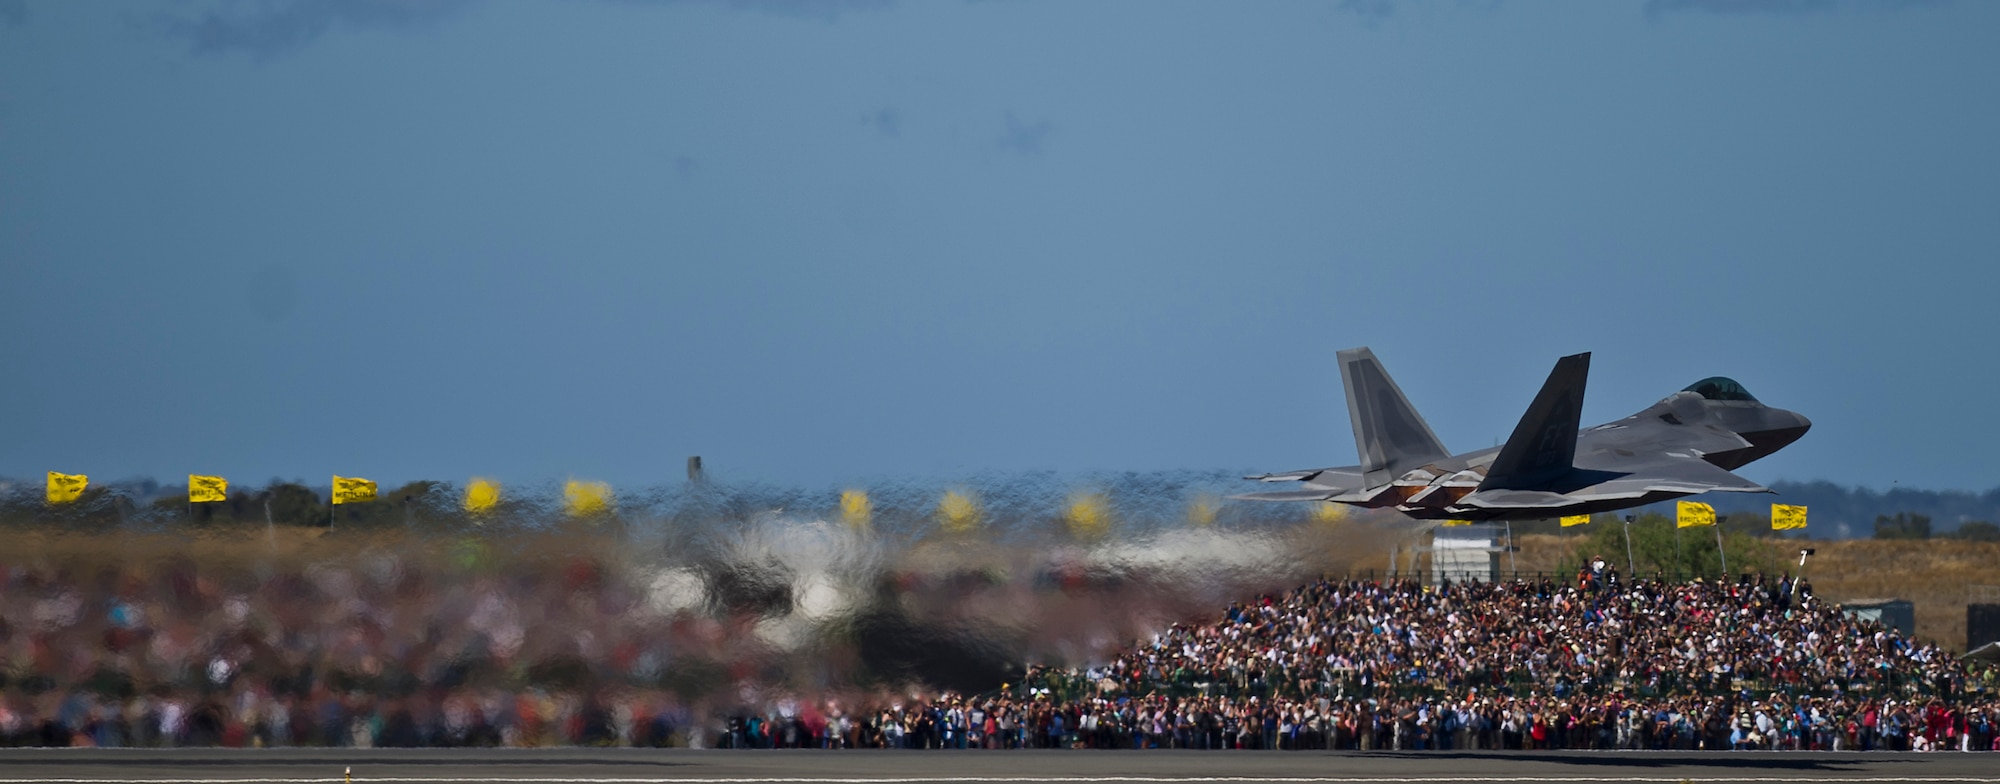 A U.S. Air Force F-22 Raptor from 94th Fighter Squadron Langley Air Force Base, Va., takes off to perform an aerial demonstration for an estimated 180,000 spectators at the Australian International Airshow, March 2, 2013, at Avalon Airport in Geelong, Australia. The Australian International Airshow 2013 (AIA13) is held biennially, and is one of the largest international trade shows in the Pacific. U.S. Pacific Command (USPACOM) participation in AIA13 directly supports theater engagement goals and objectives and further enhances relationships with other Pacific nations. (U.S. Air Force photo by Tech. Sgt. Michael R. Holzworth) 